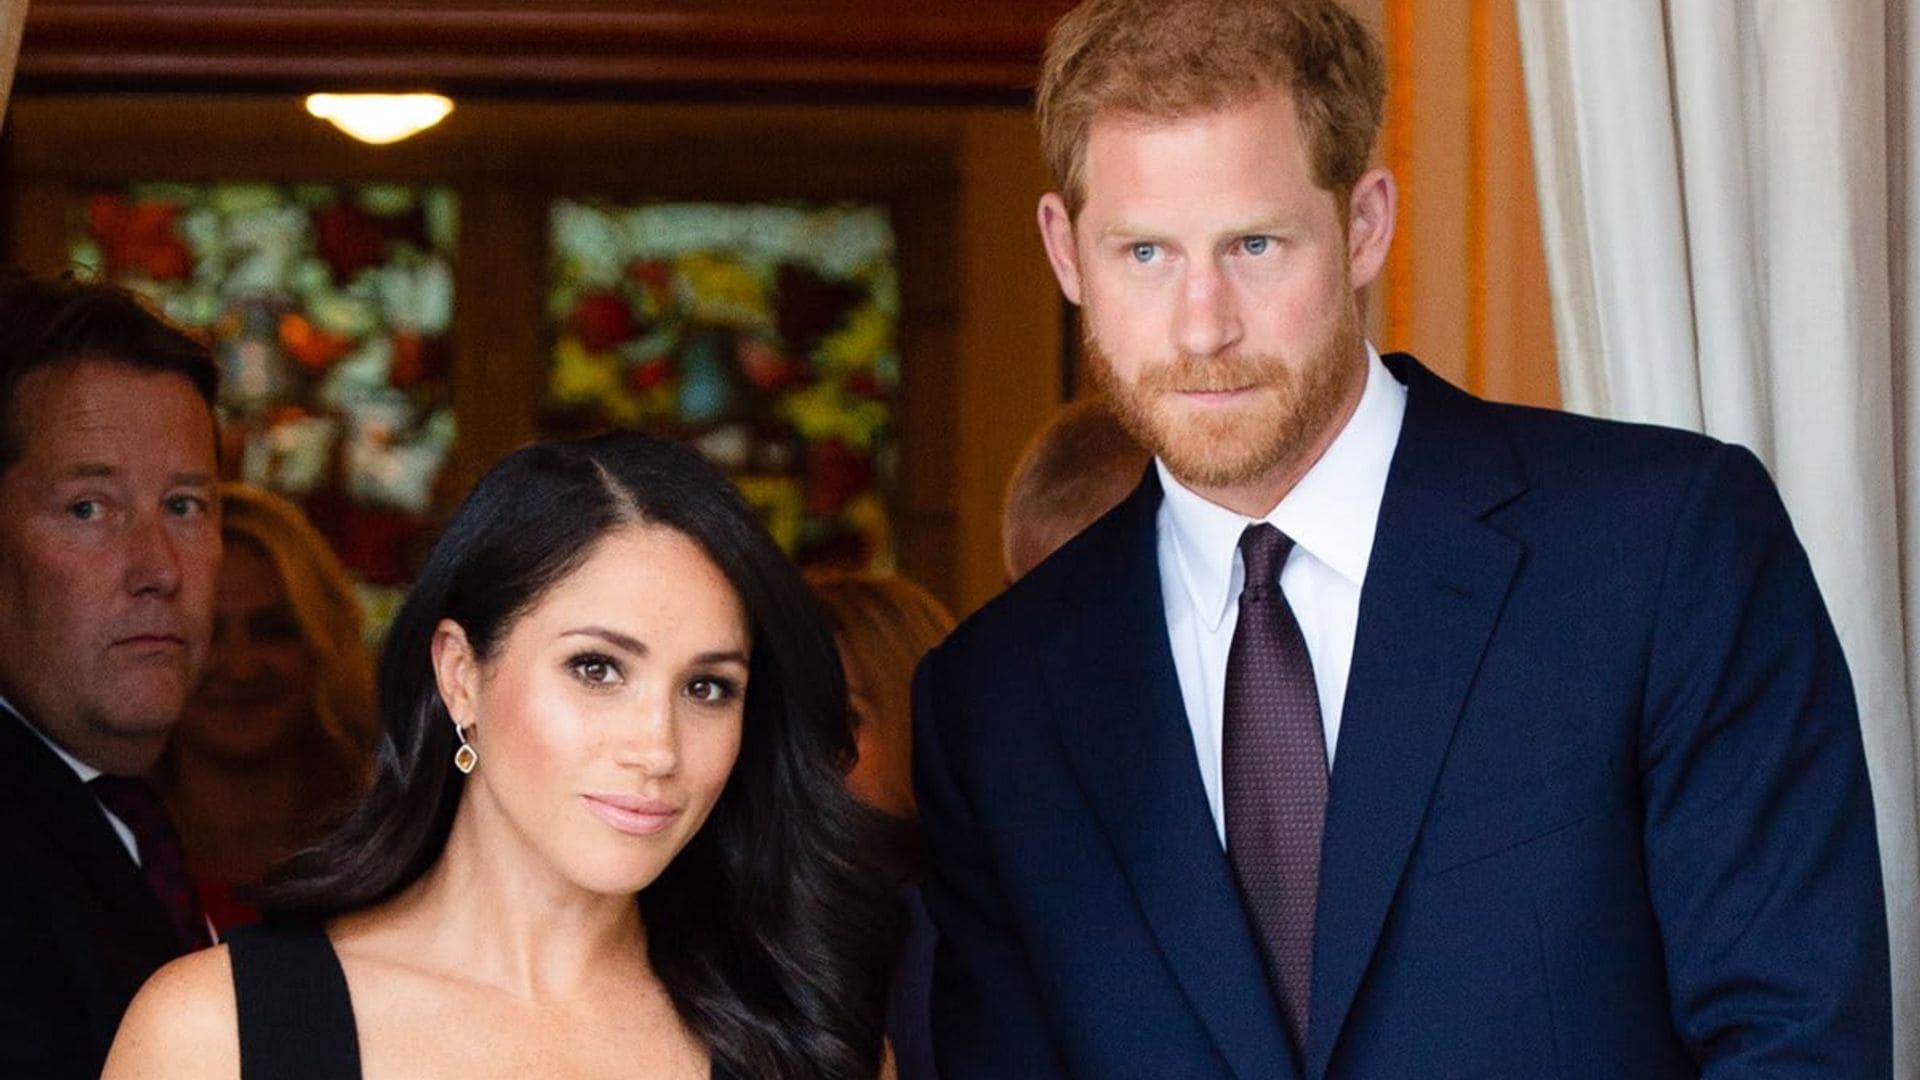 Why Prince Harry says he, Meghan Markle and kids are ‘unable to return’ to the UK